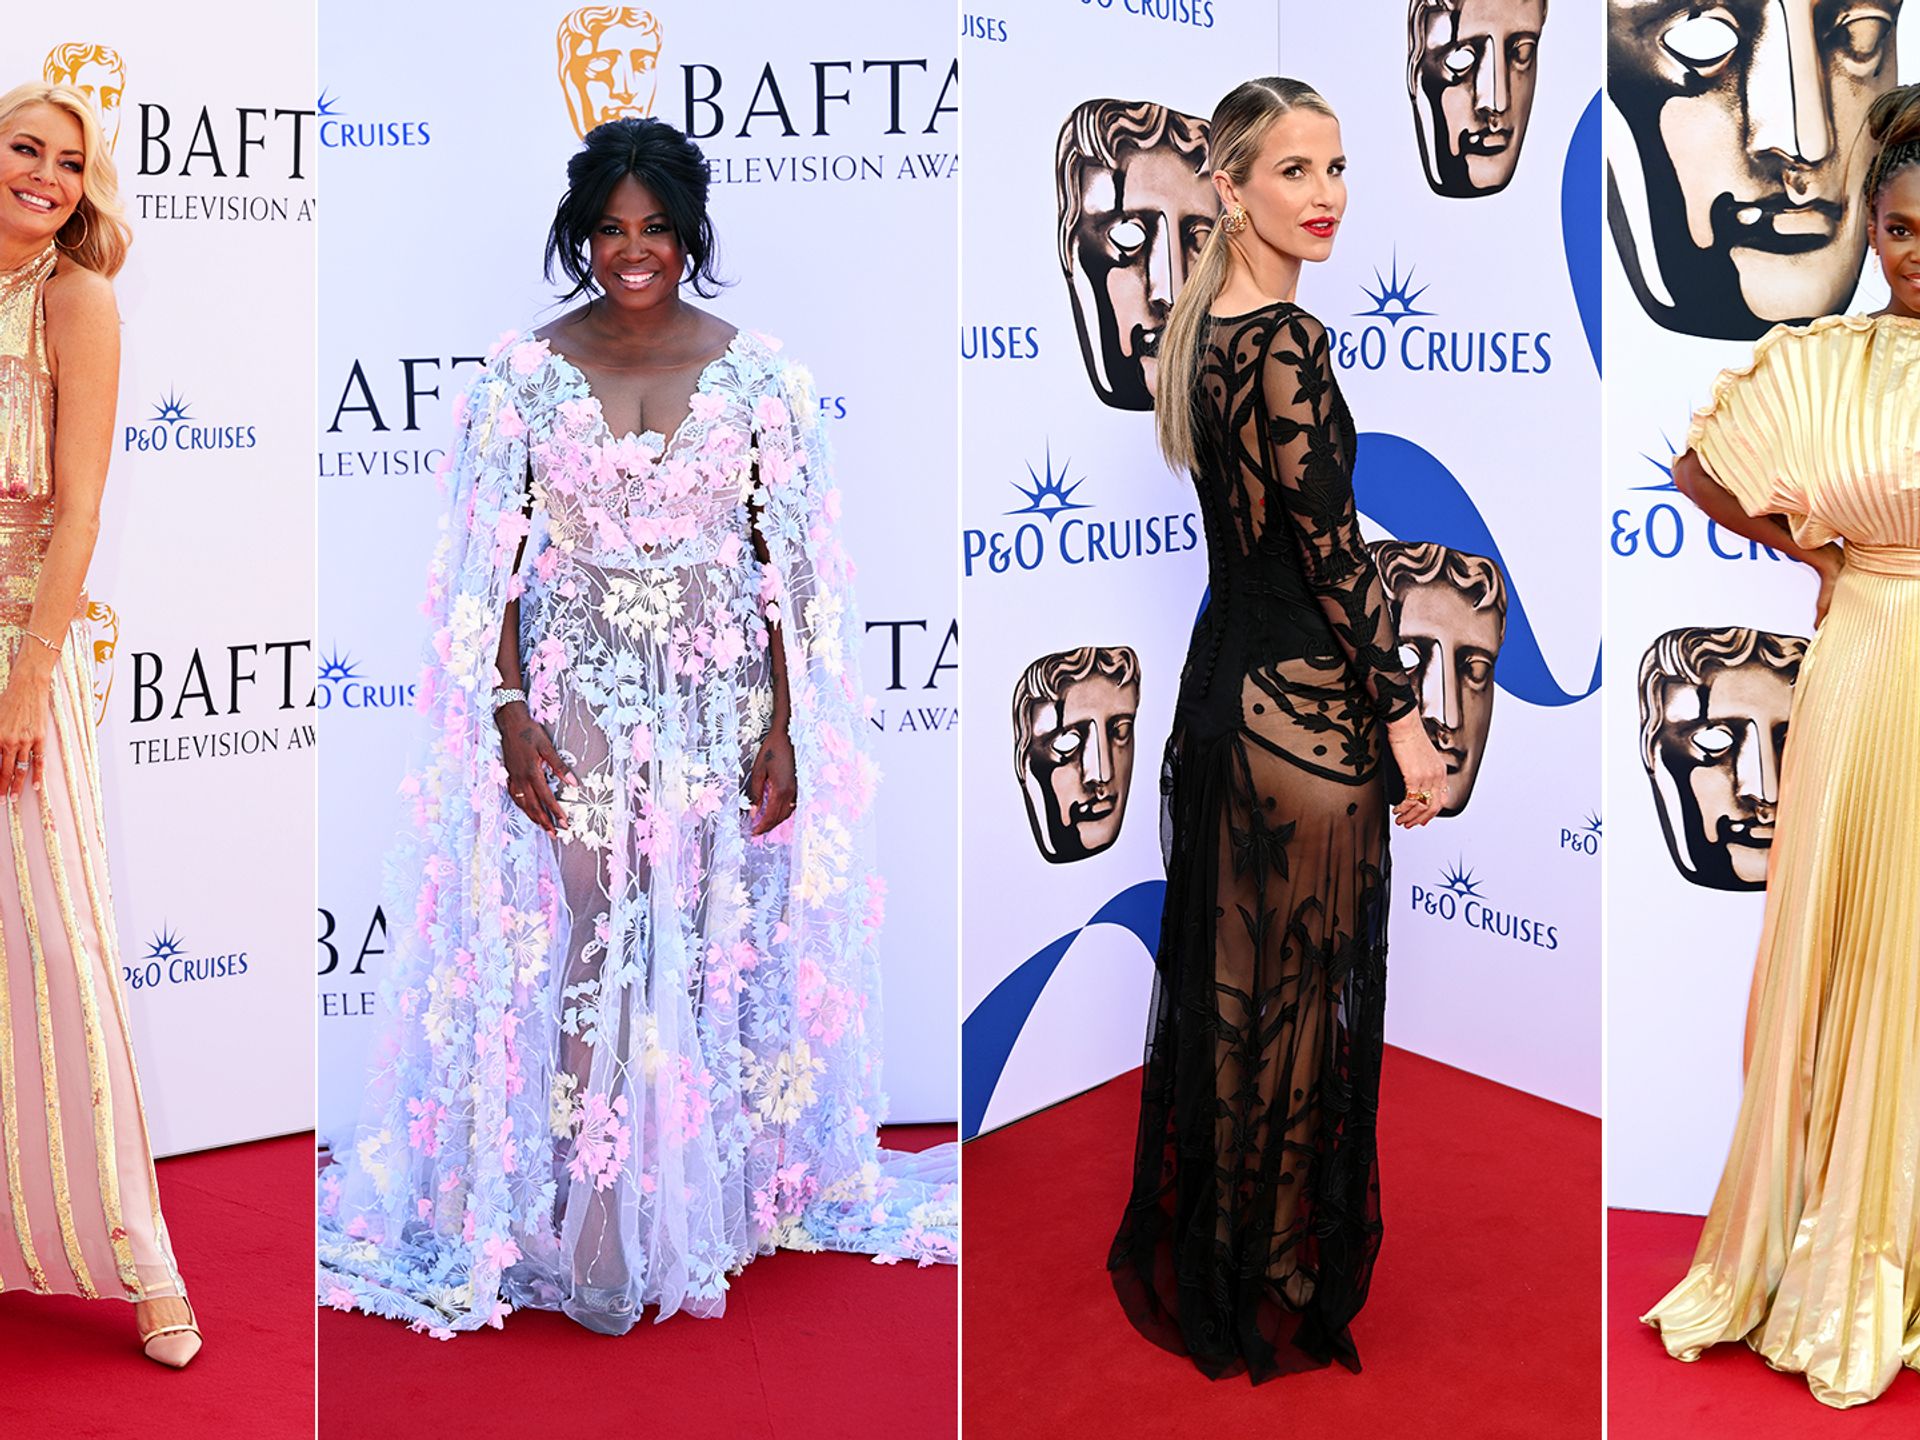 The most memorable menswear moments at the 2022 BAFTAs